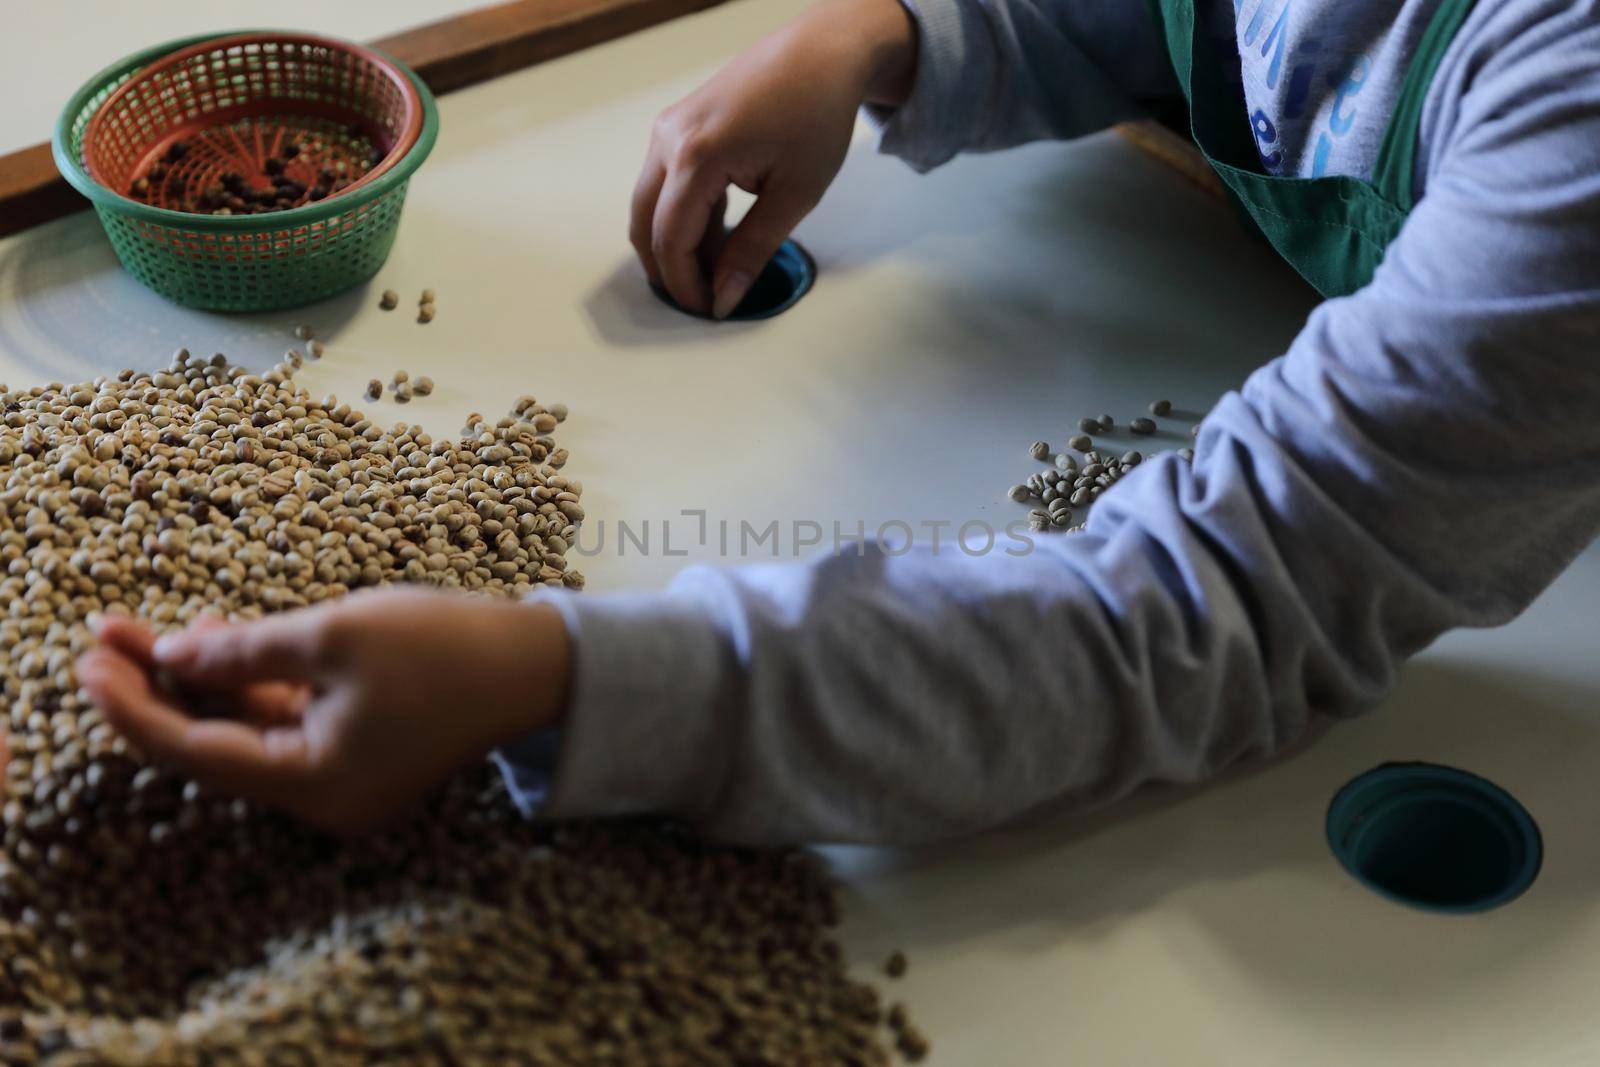 Workers Hands choosing coffee beans at coffee factory by piyato